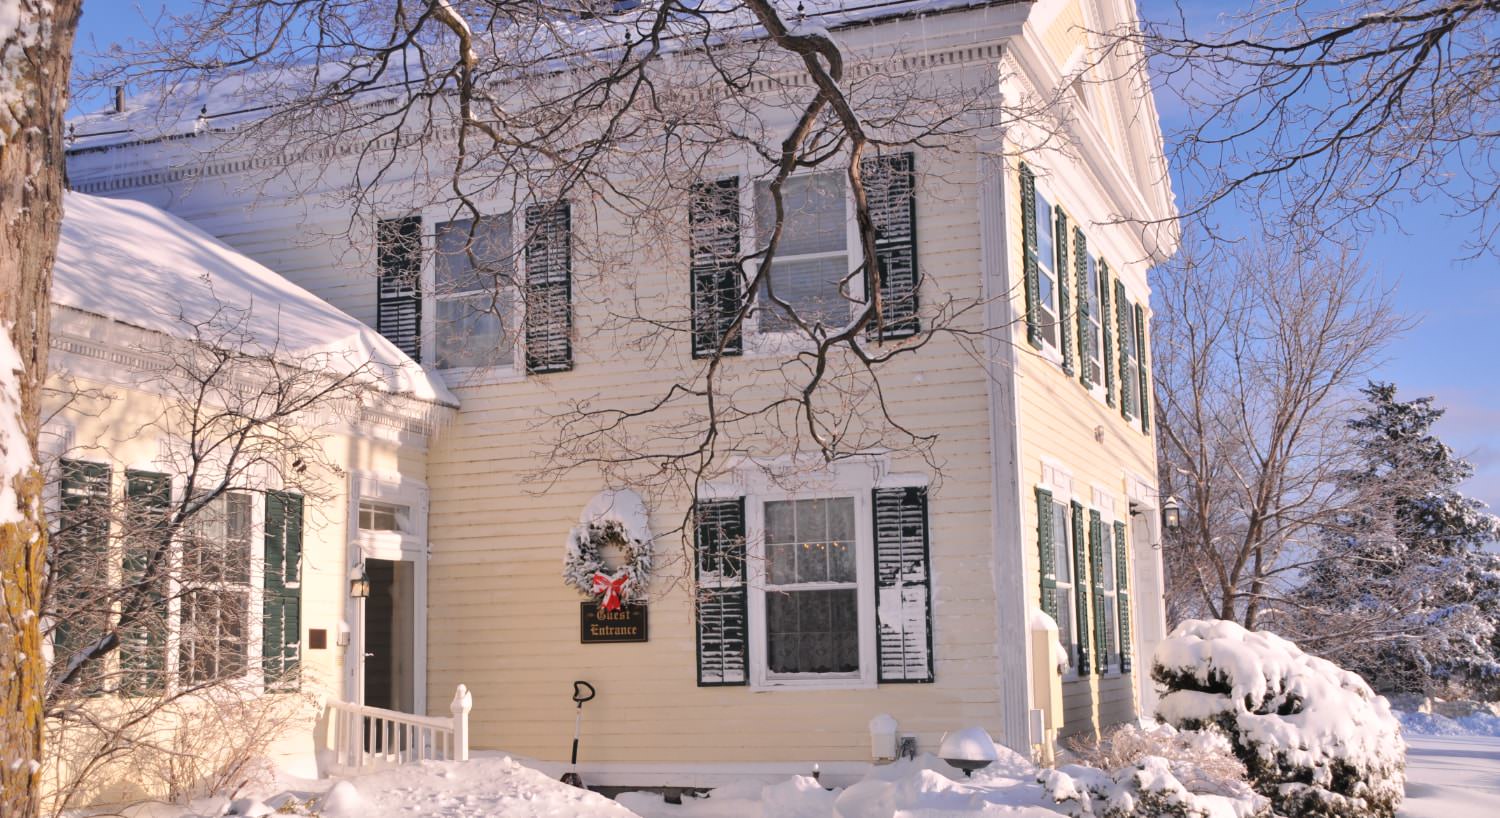 Exterior view of the property painted yellow with white trim and green shutters and covered in snow